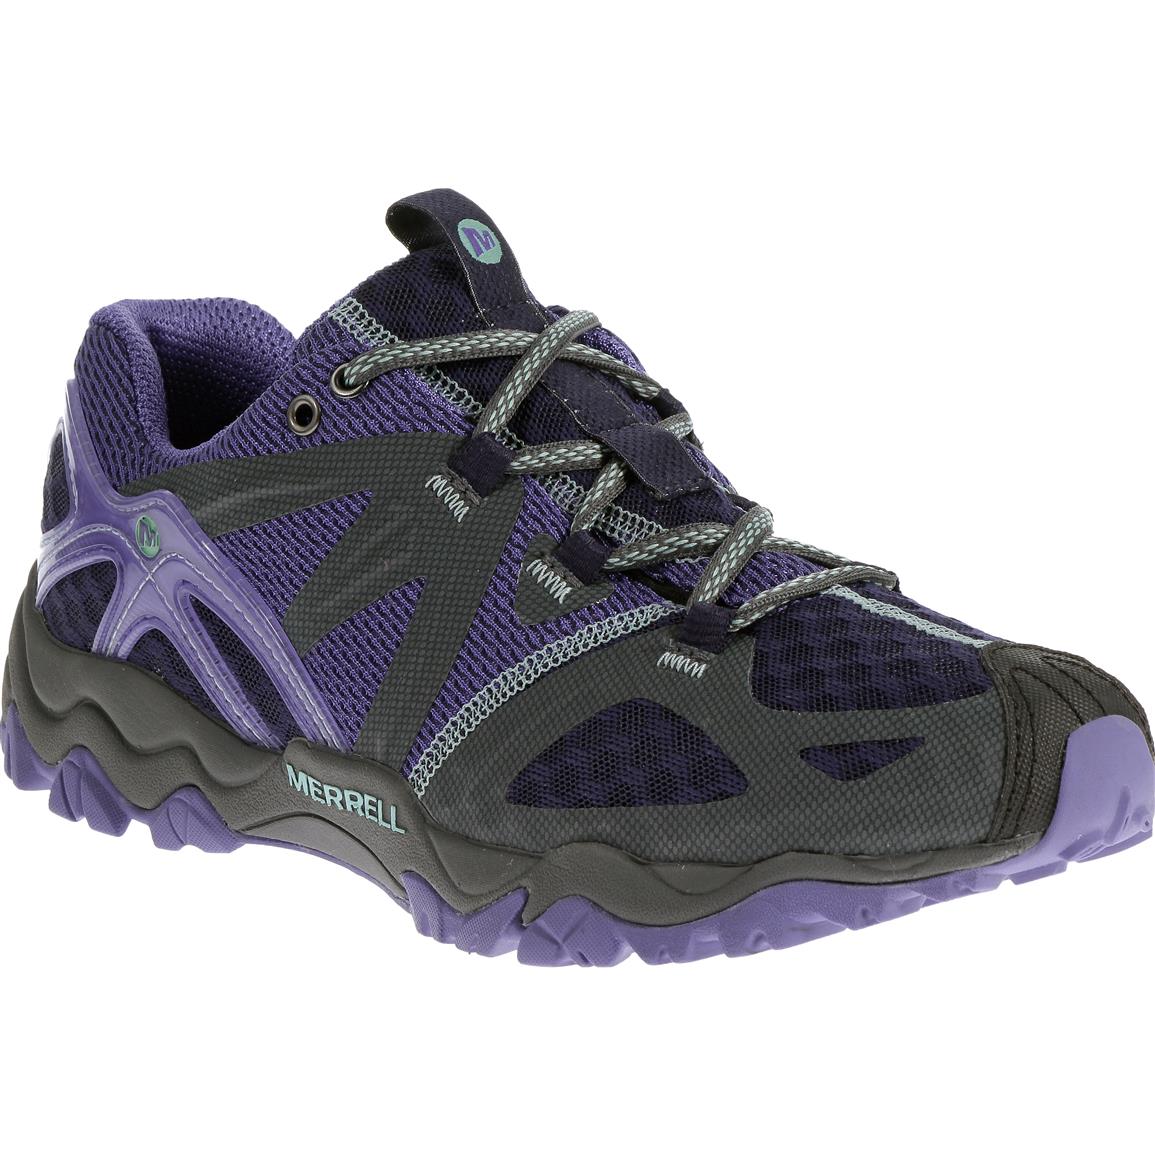 Women's Merrell Grassbow Air Hiking Shoes - 654155, Hiking Boots ...